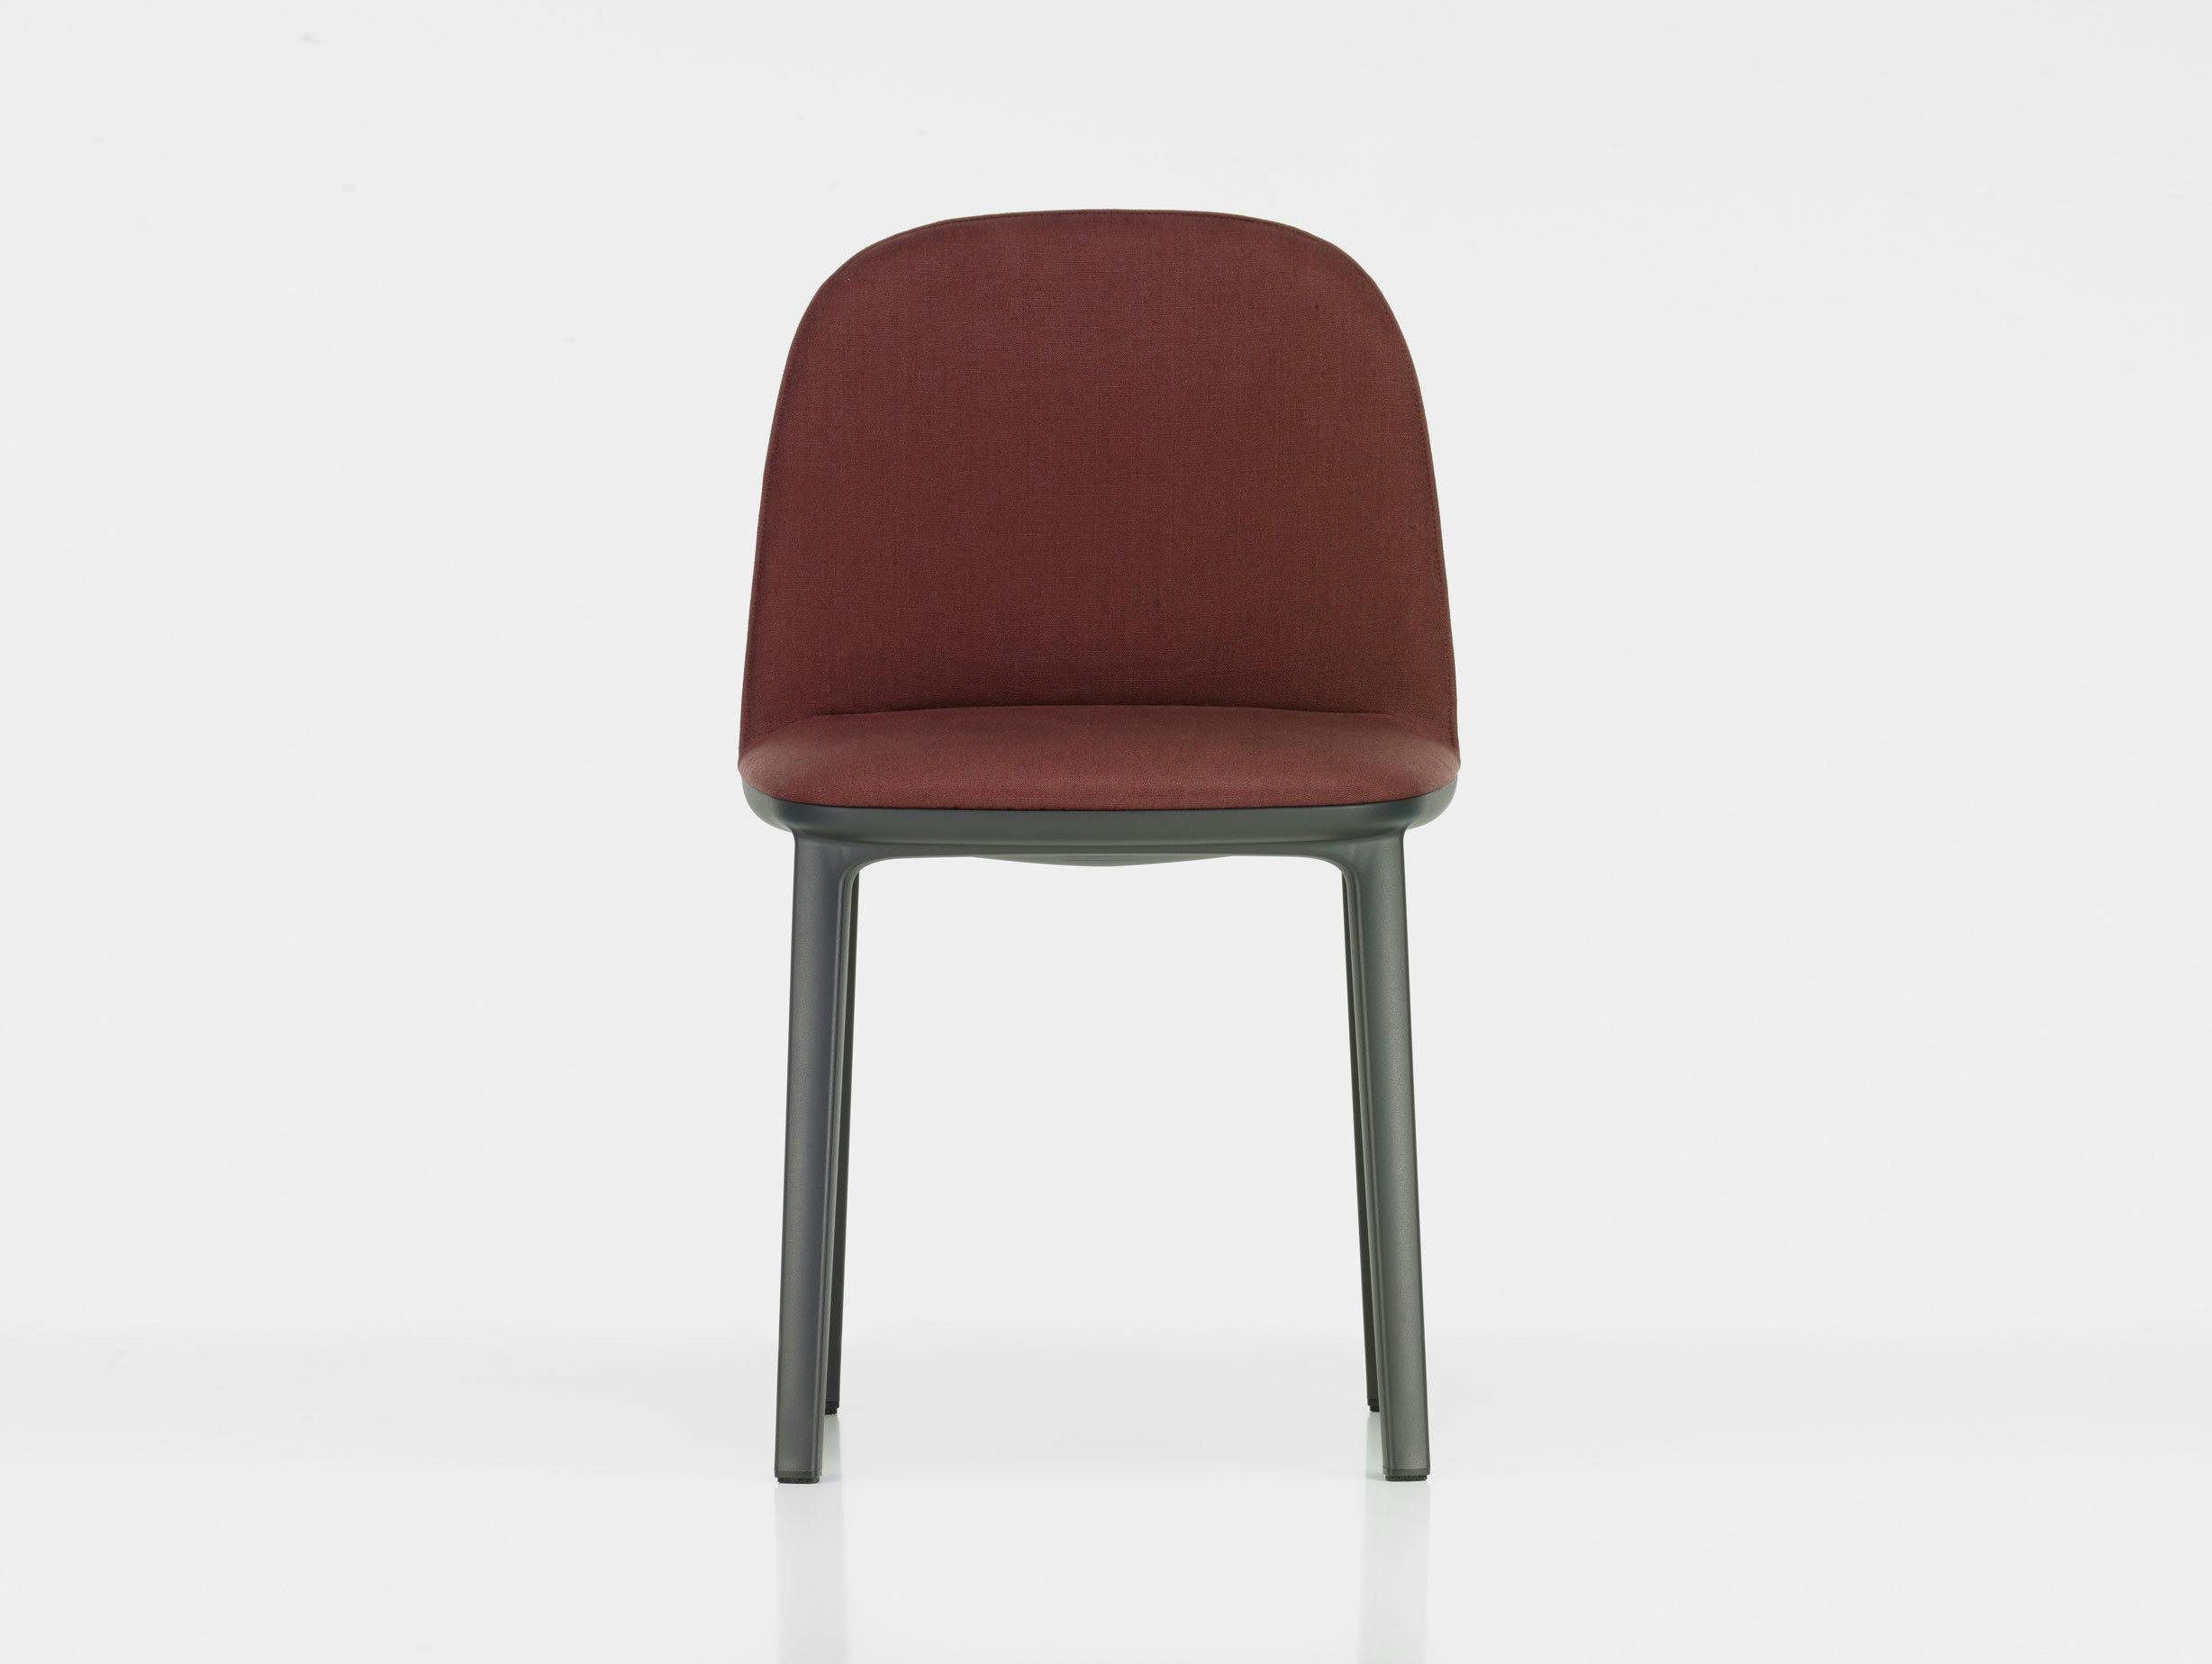 Vitra Softshell Side Chair Volo Marron Bouroullec